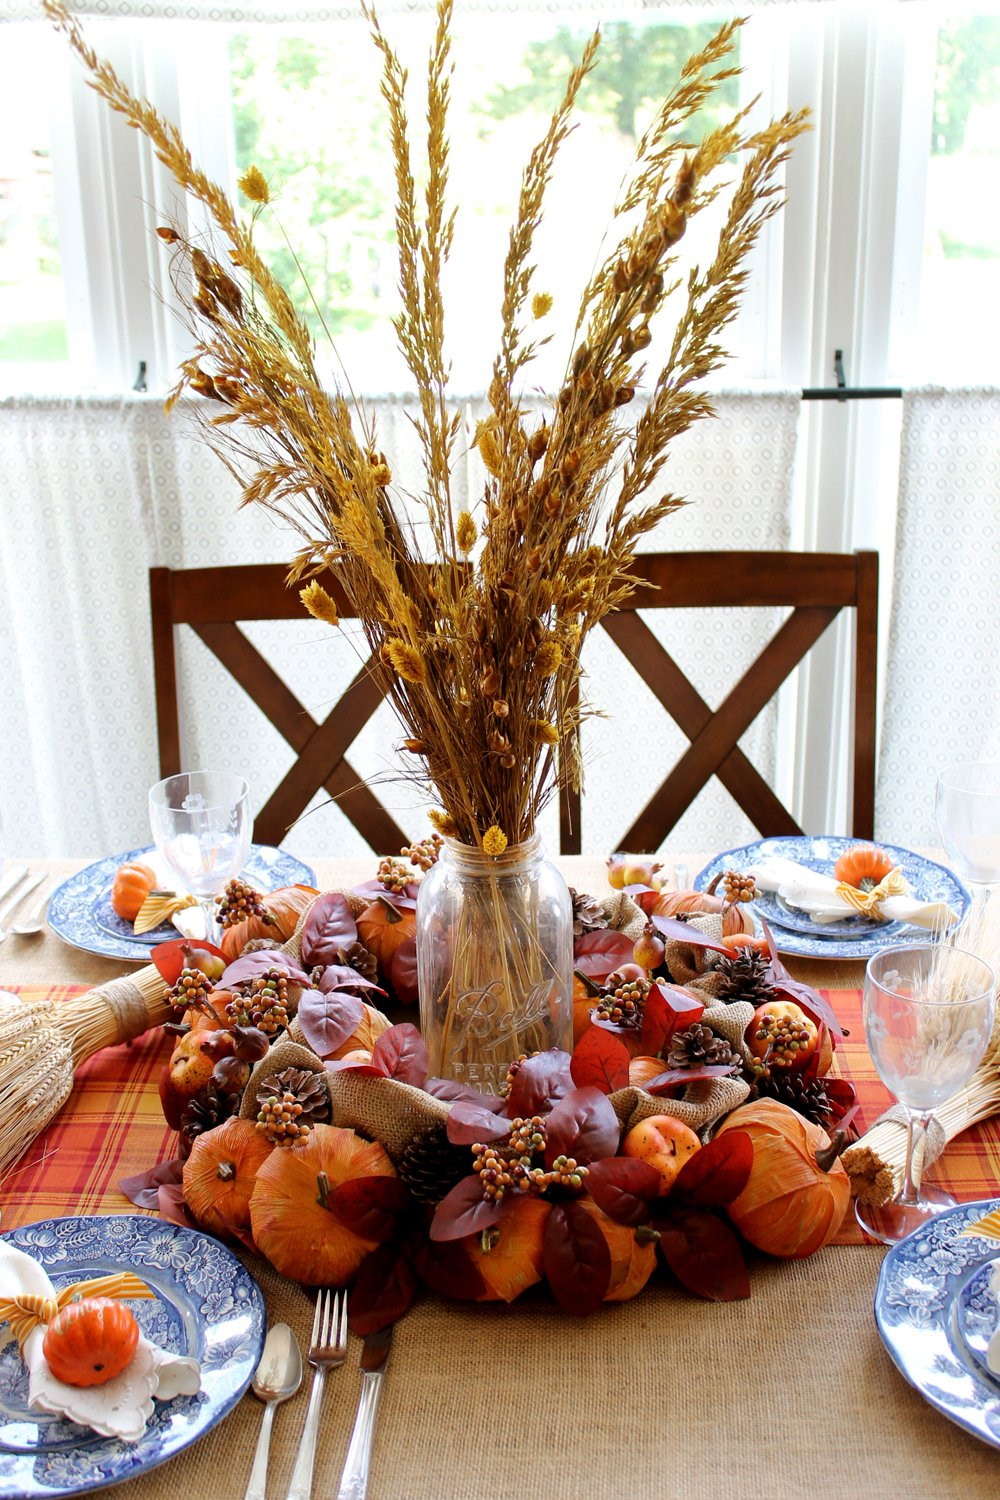 Table Decorations For Thanksgiving
 DIY Thanksgiving Decorations for Your Table The Country